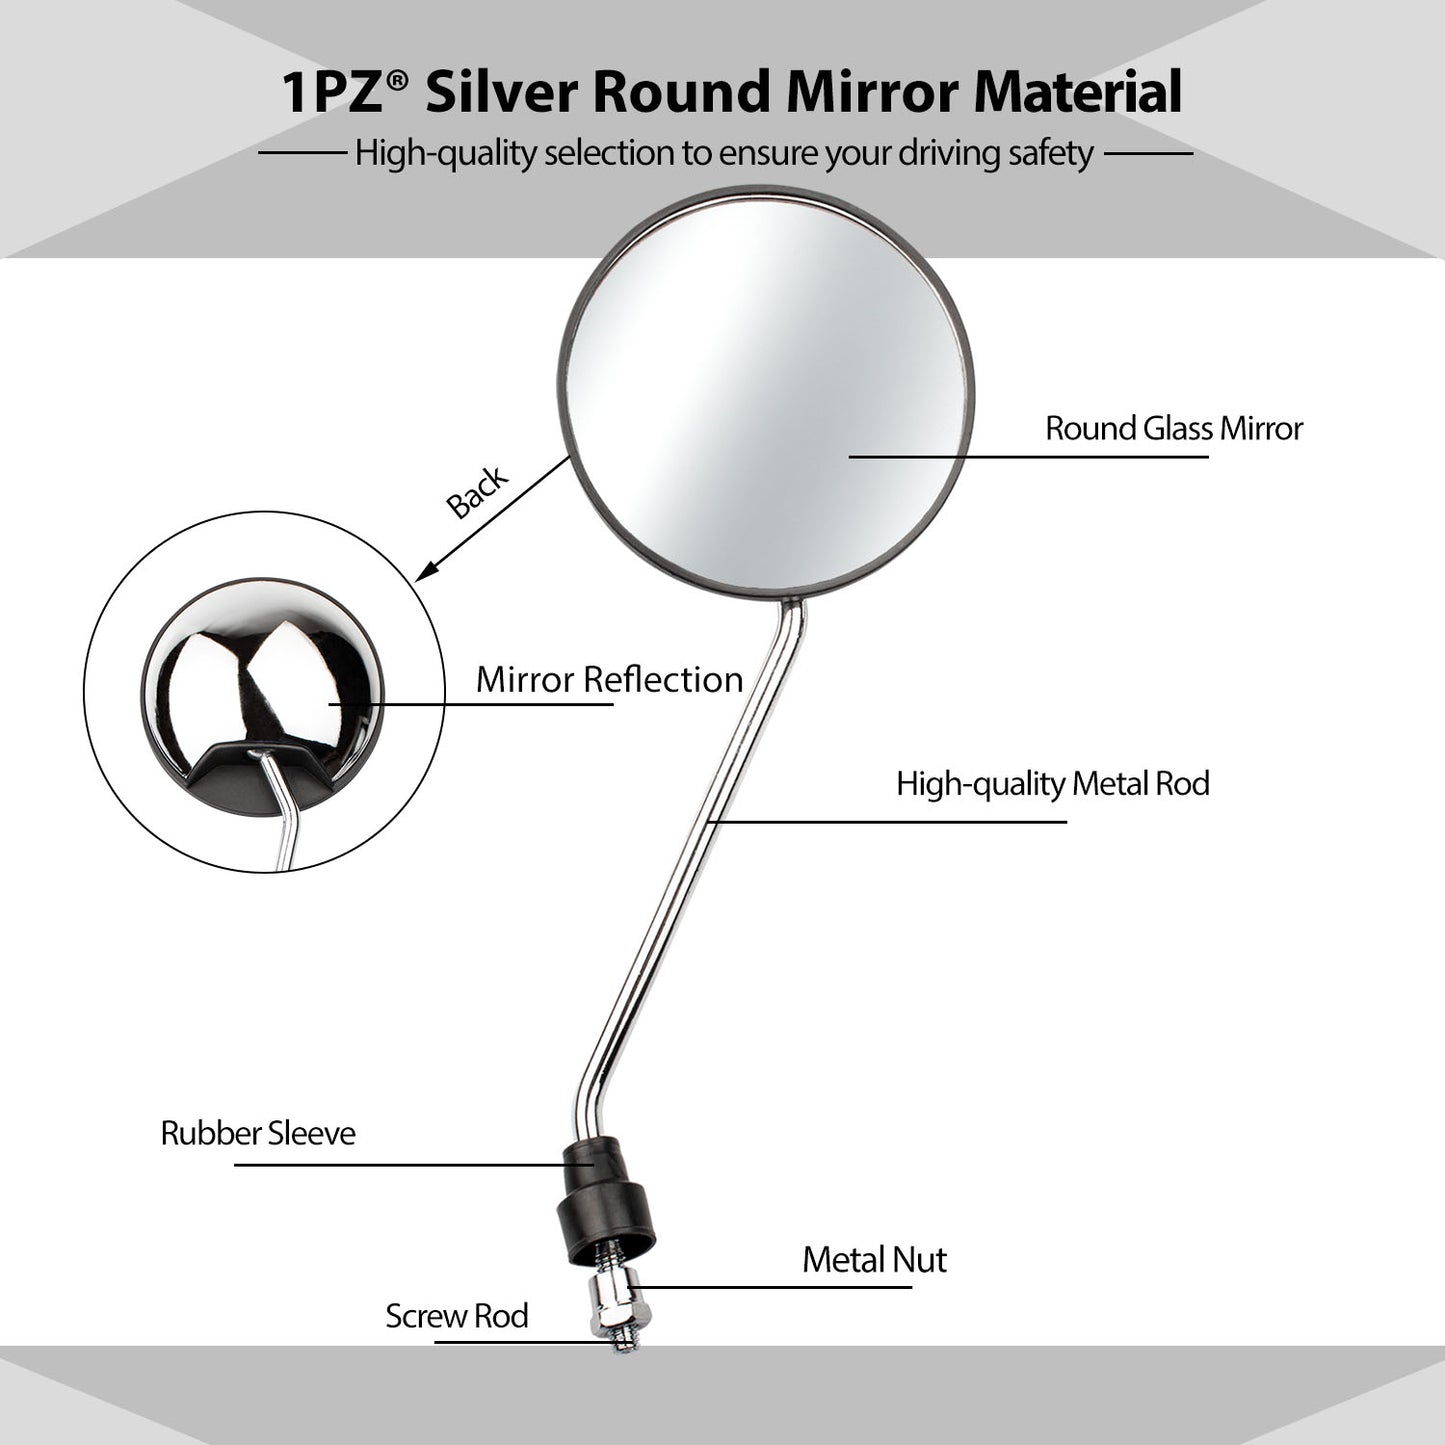 1PZ RM8-CH1 Adjustable Universal M8x1.0 Antenna Style Retro Vintage Round Mirrors with 7/8" 22mm clamps for Motorcycle Go Kart ATV Scooter Dirt Bike Mini Bike Moped Quad Wheeler (CHROME)